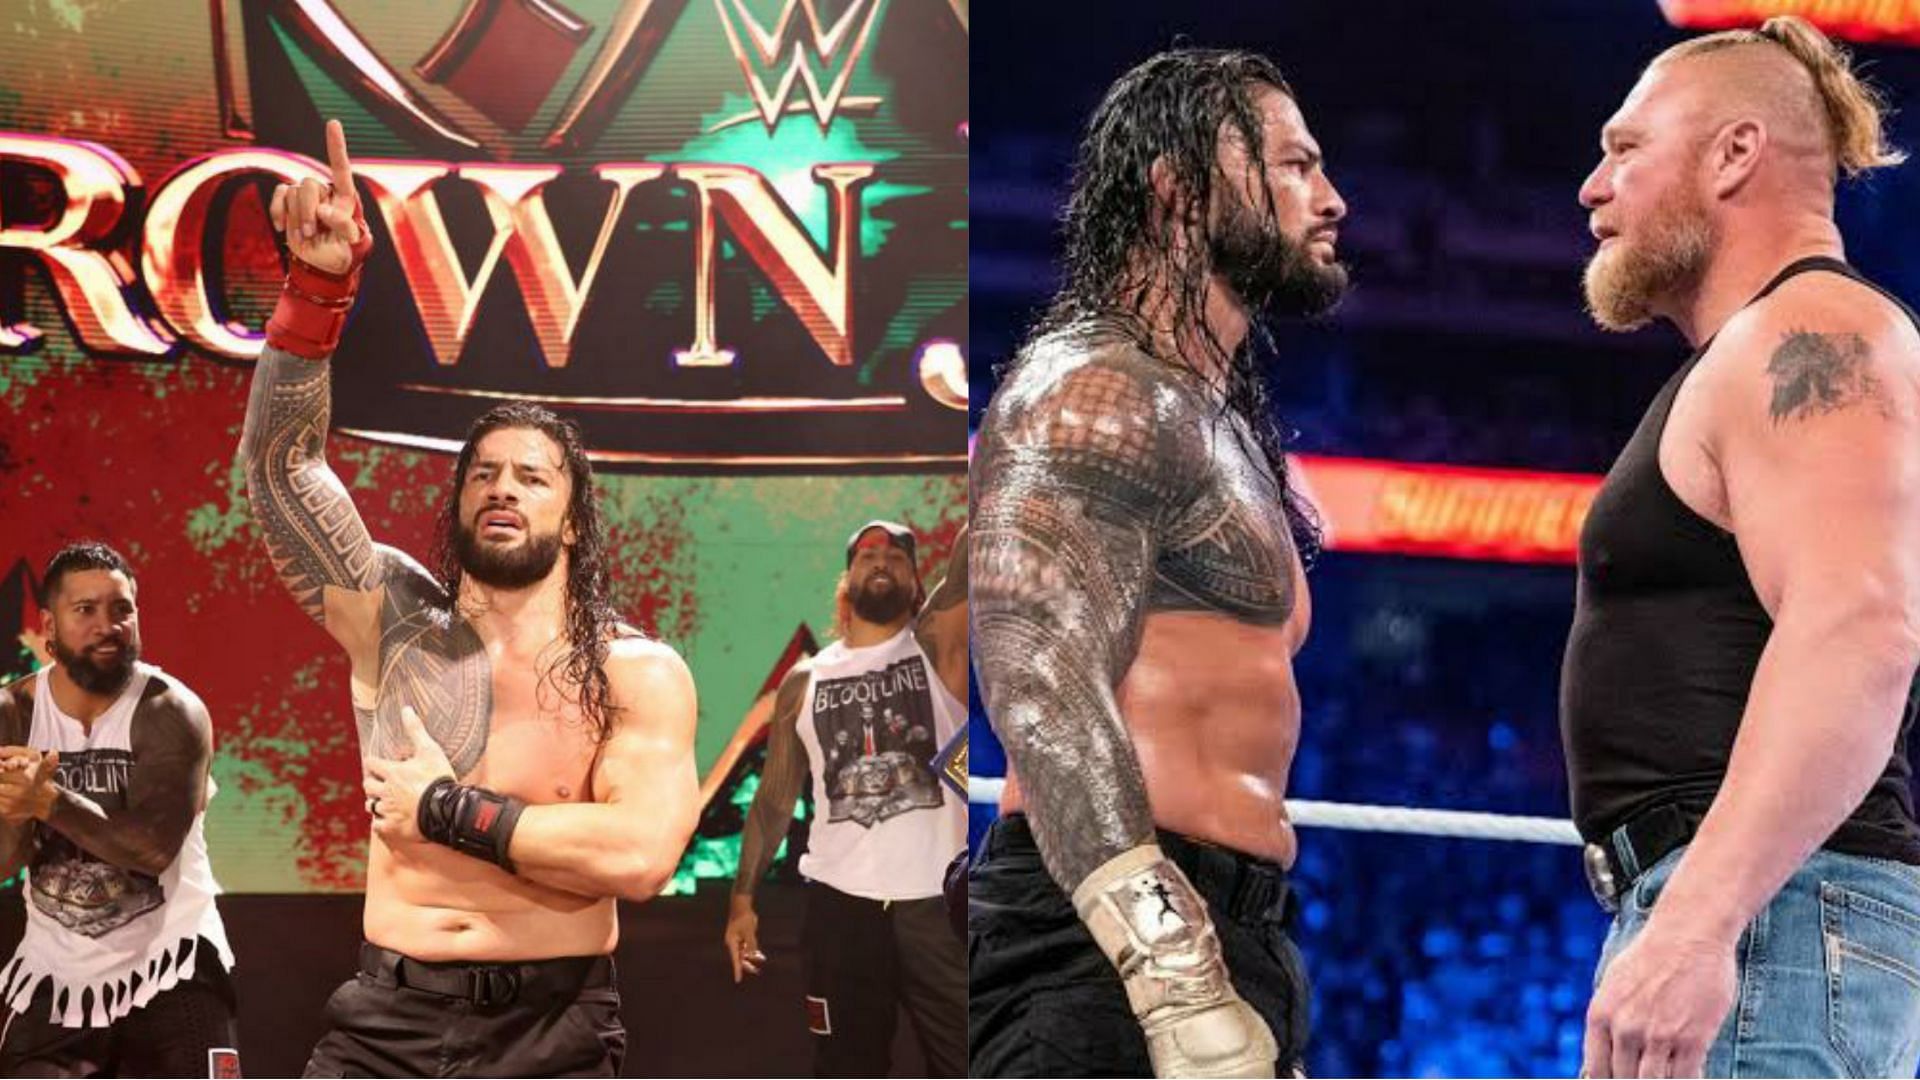 Roman Reigns will face Brock Lesnar in the main event of WrestleMania 38.